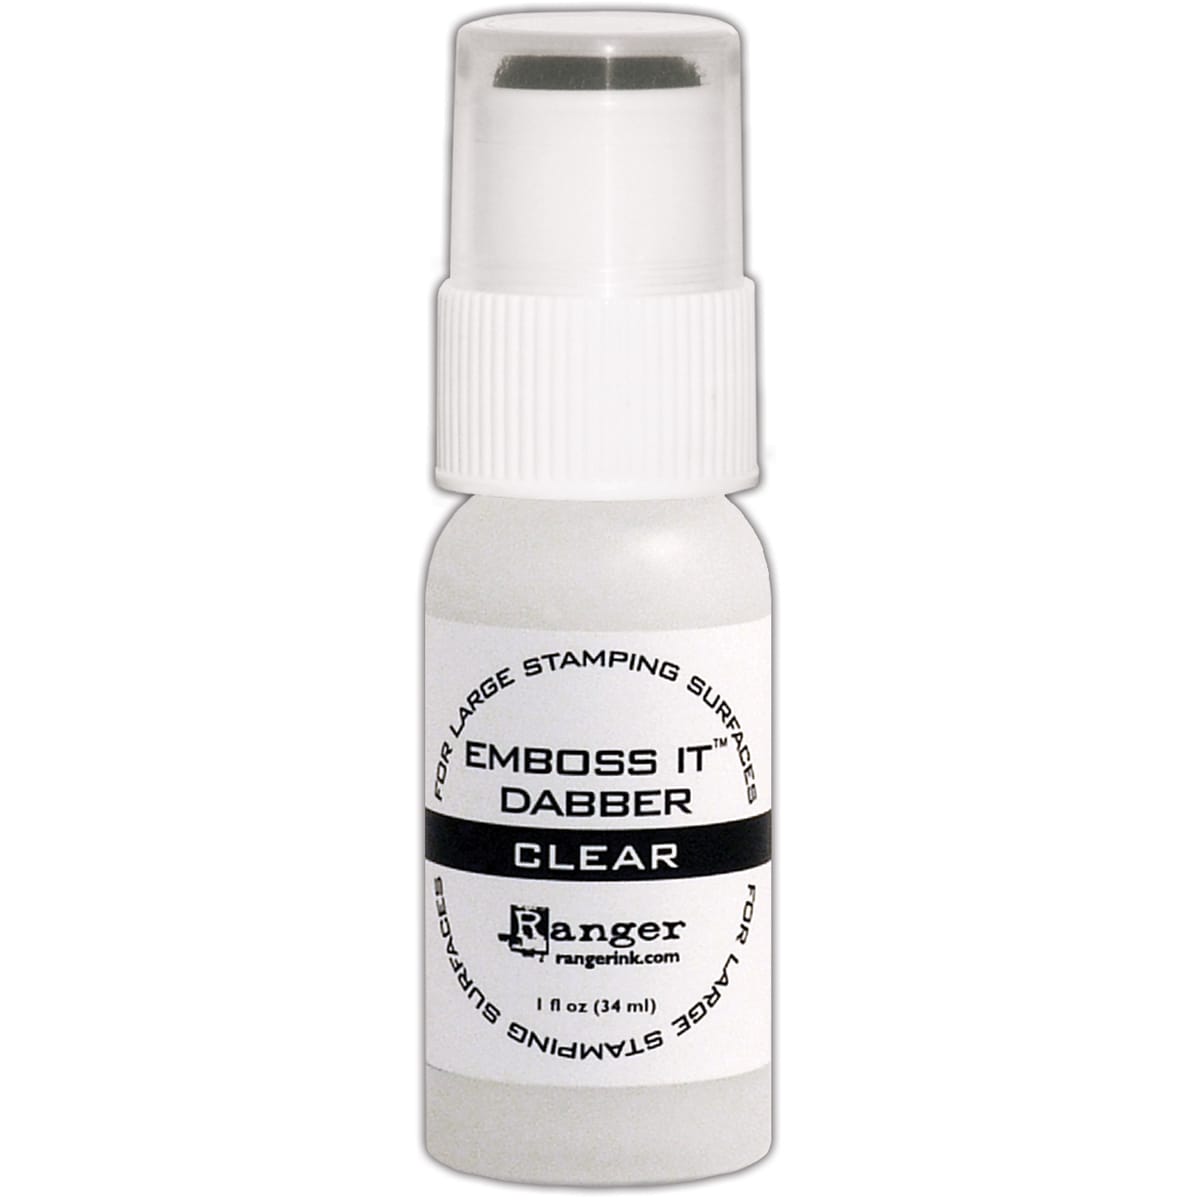 Emboss It Embossing Ink: Acid Free/Nontoxic, 1 ounce - image 2 of 2